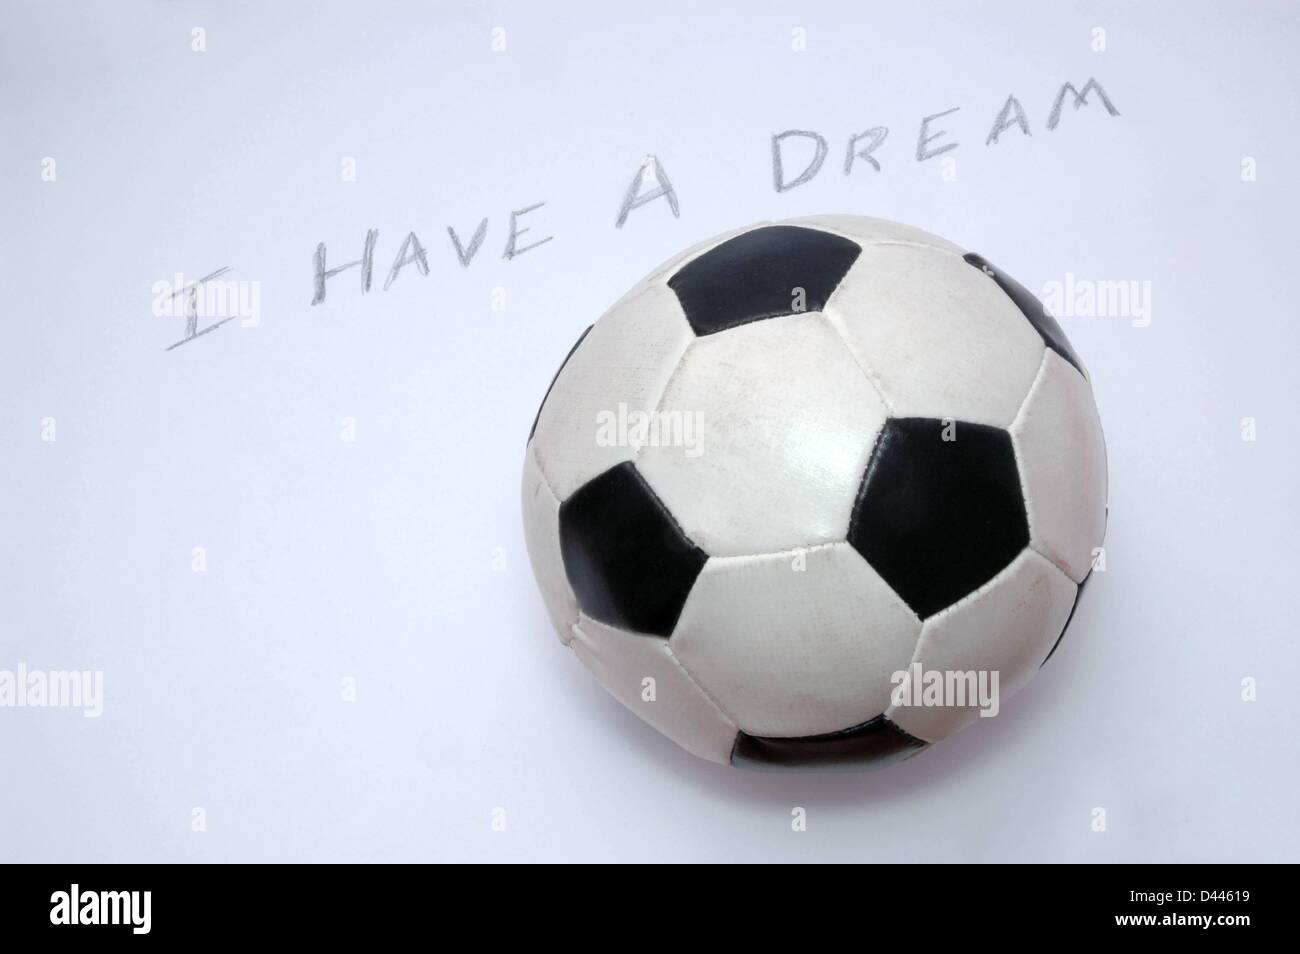 Illustration - A soccer ball is pictured next to the writing 'I have a dream' in Berlin, Germany, 22 December 2007. Fotoarchiv für ZeitgeschichteS.Steinach Stock Photo